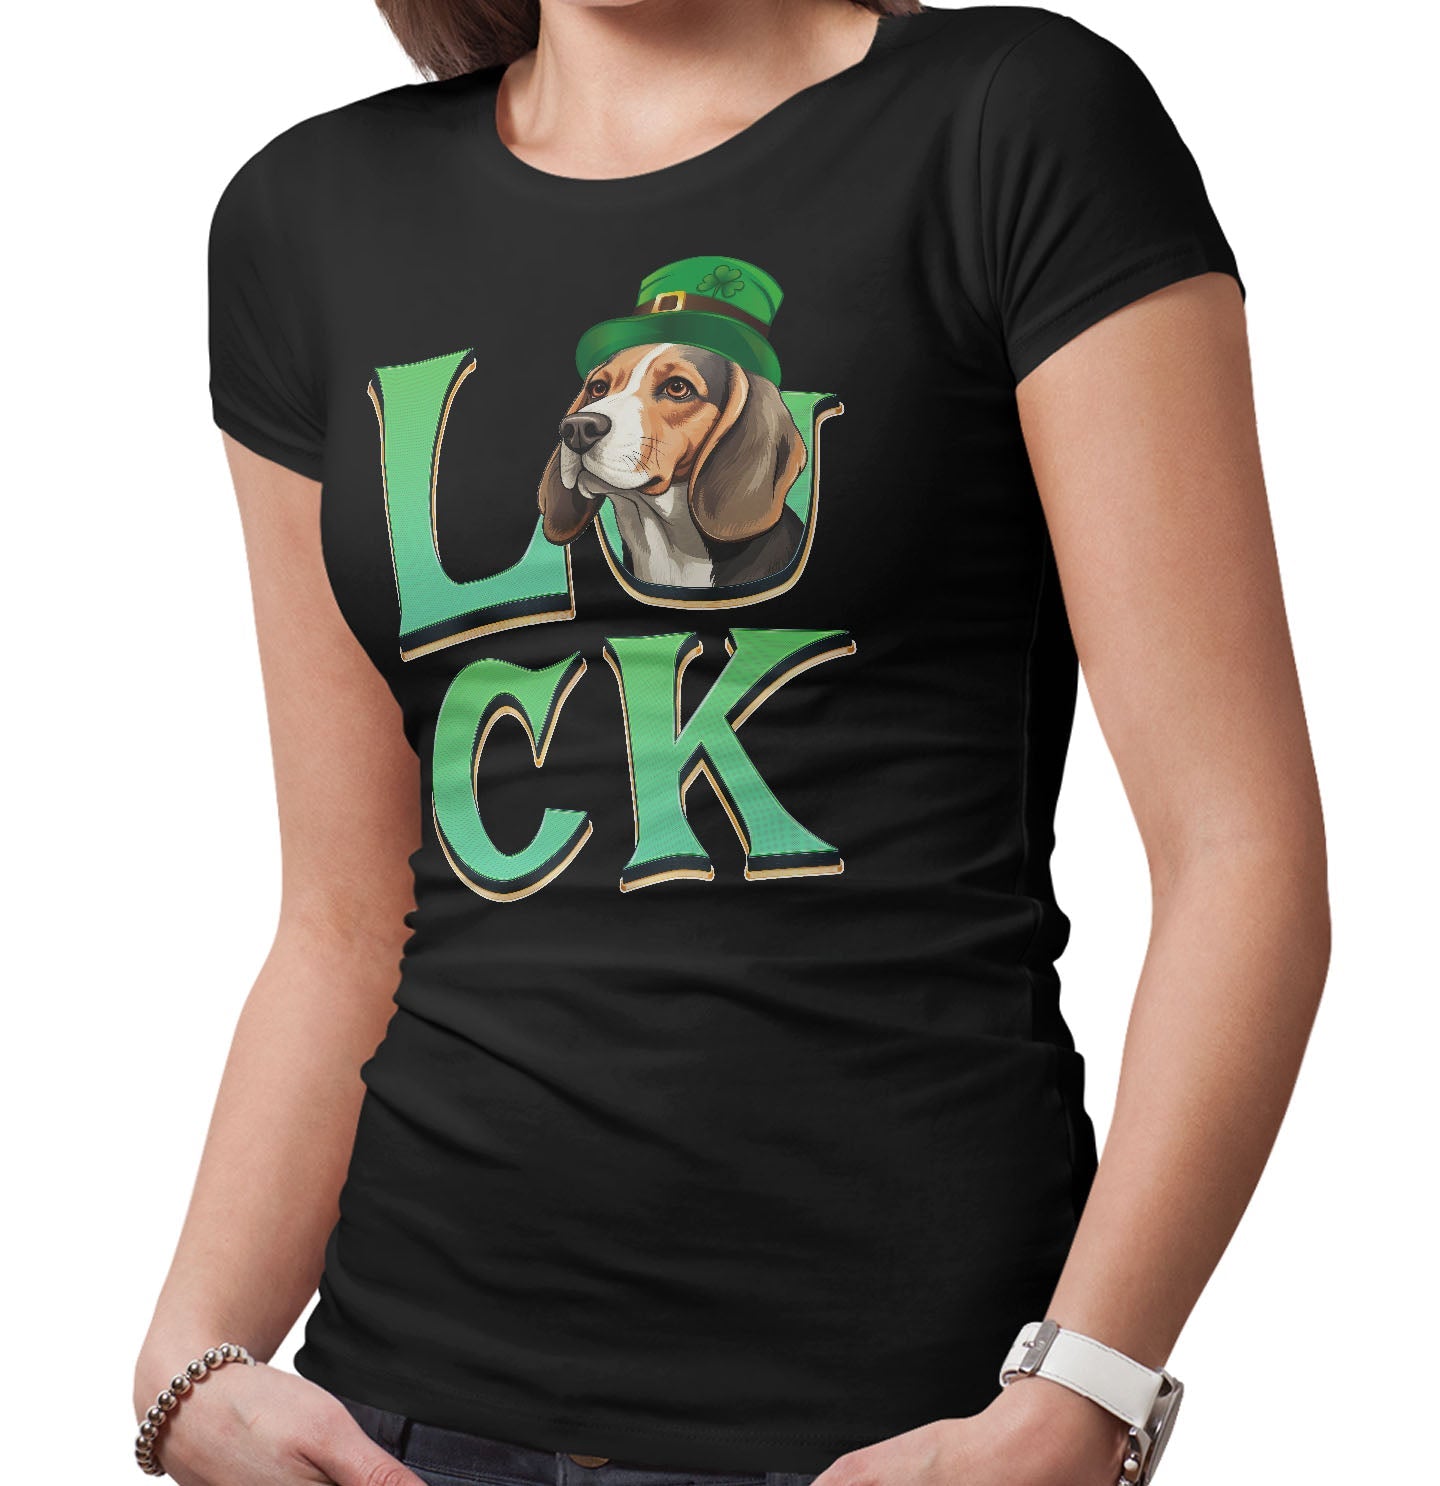 Big LUCK St. Patrick's Day Beagle - Women's Fitted T-Shirt